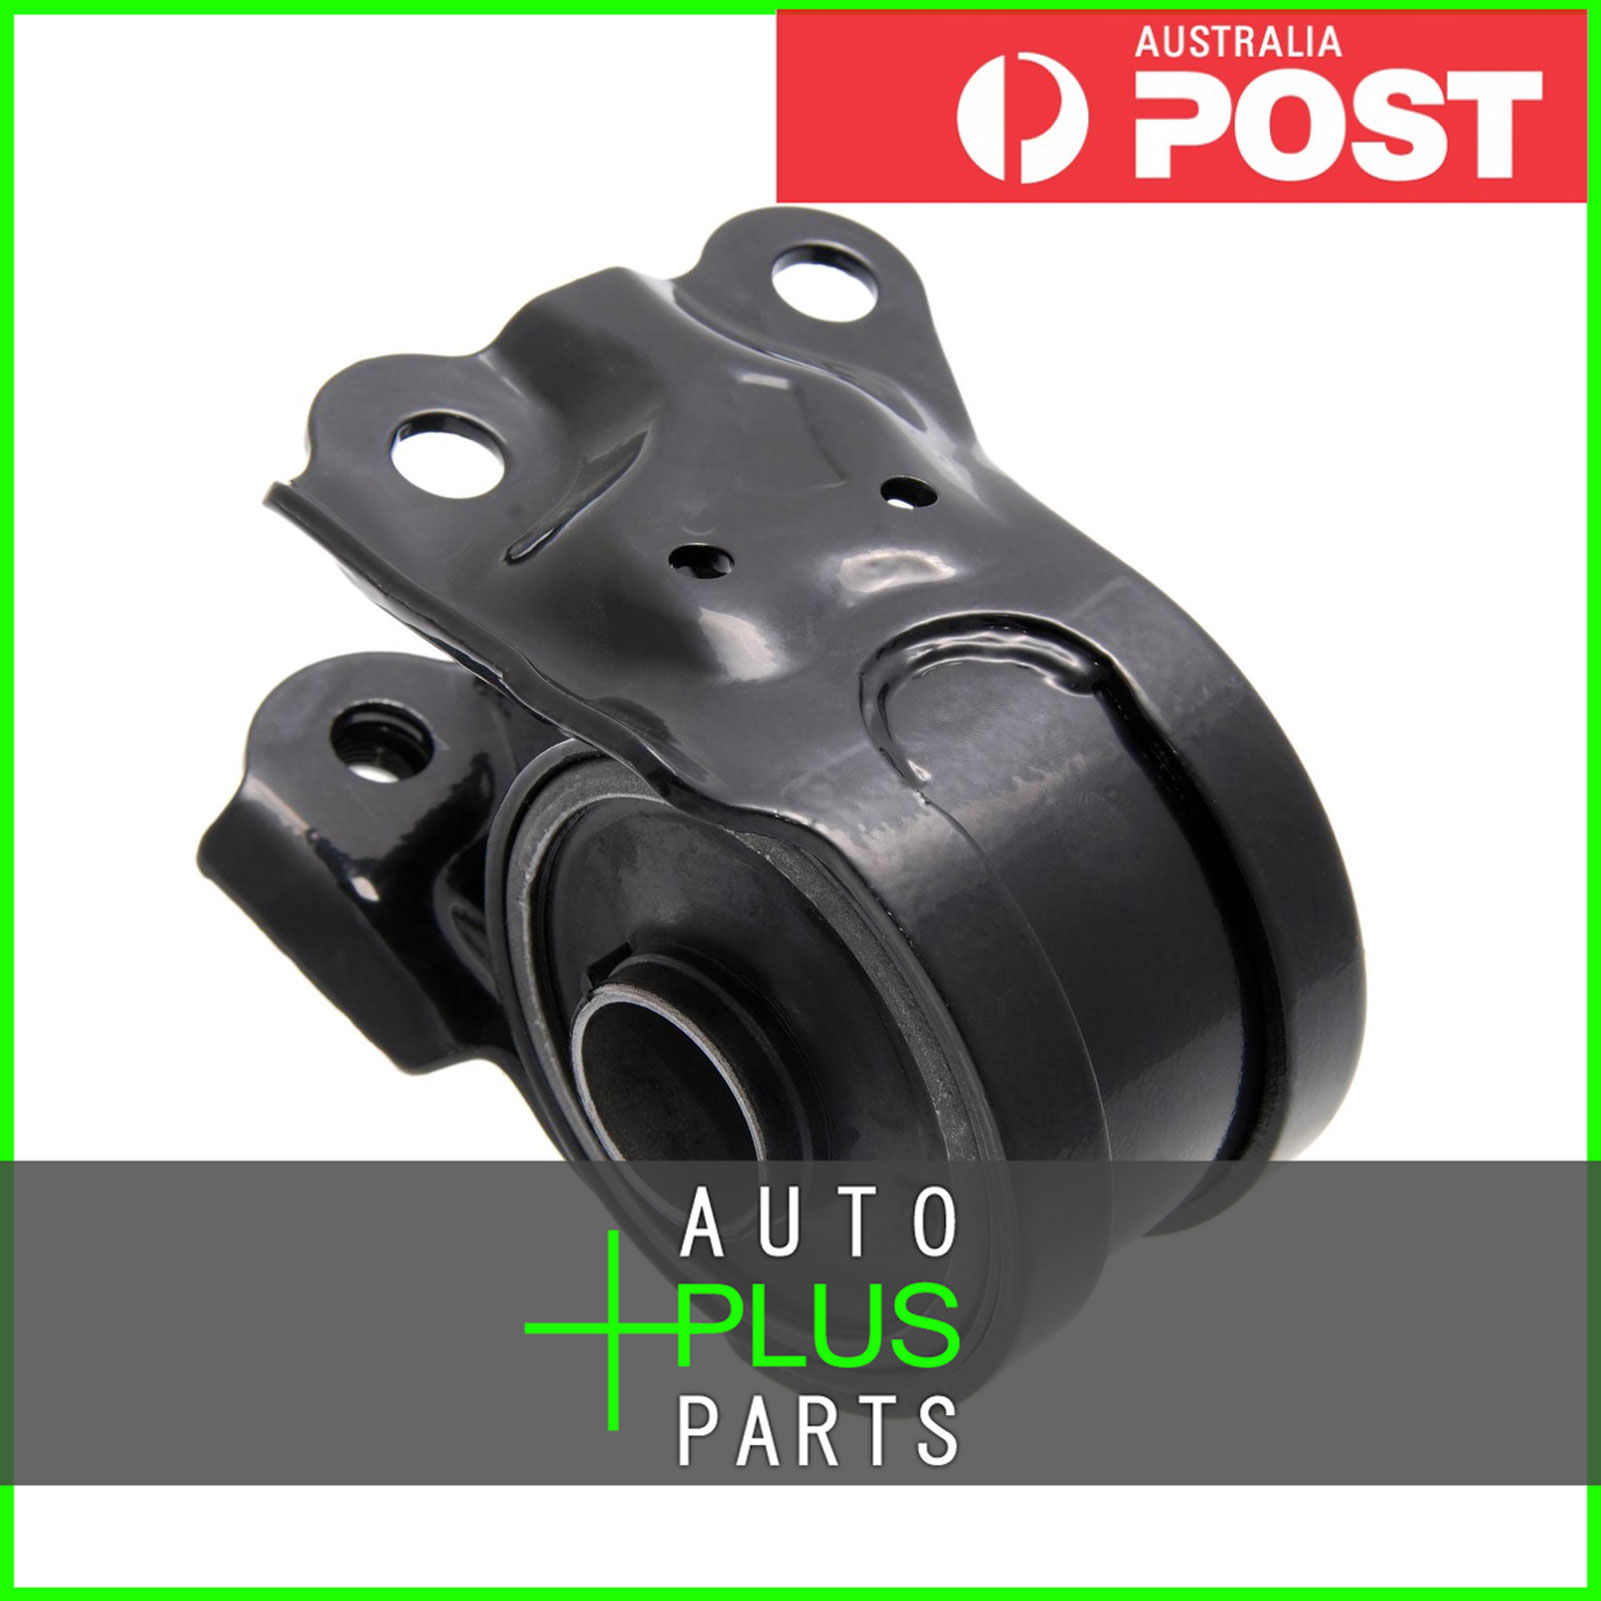 Fits MAZDA CX-9 TB 2007-2013 - Rear Rubber Bush Left Hand Lh Front Arm (Hydro) Product Photo